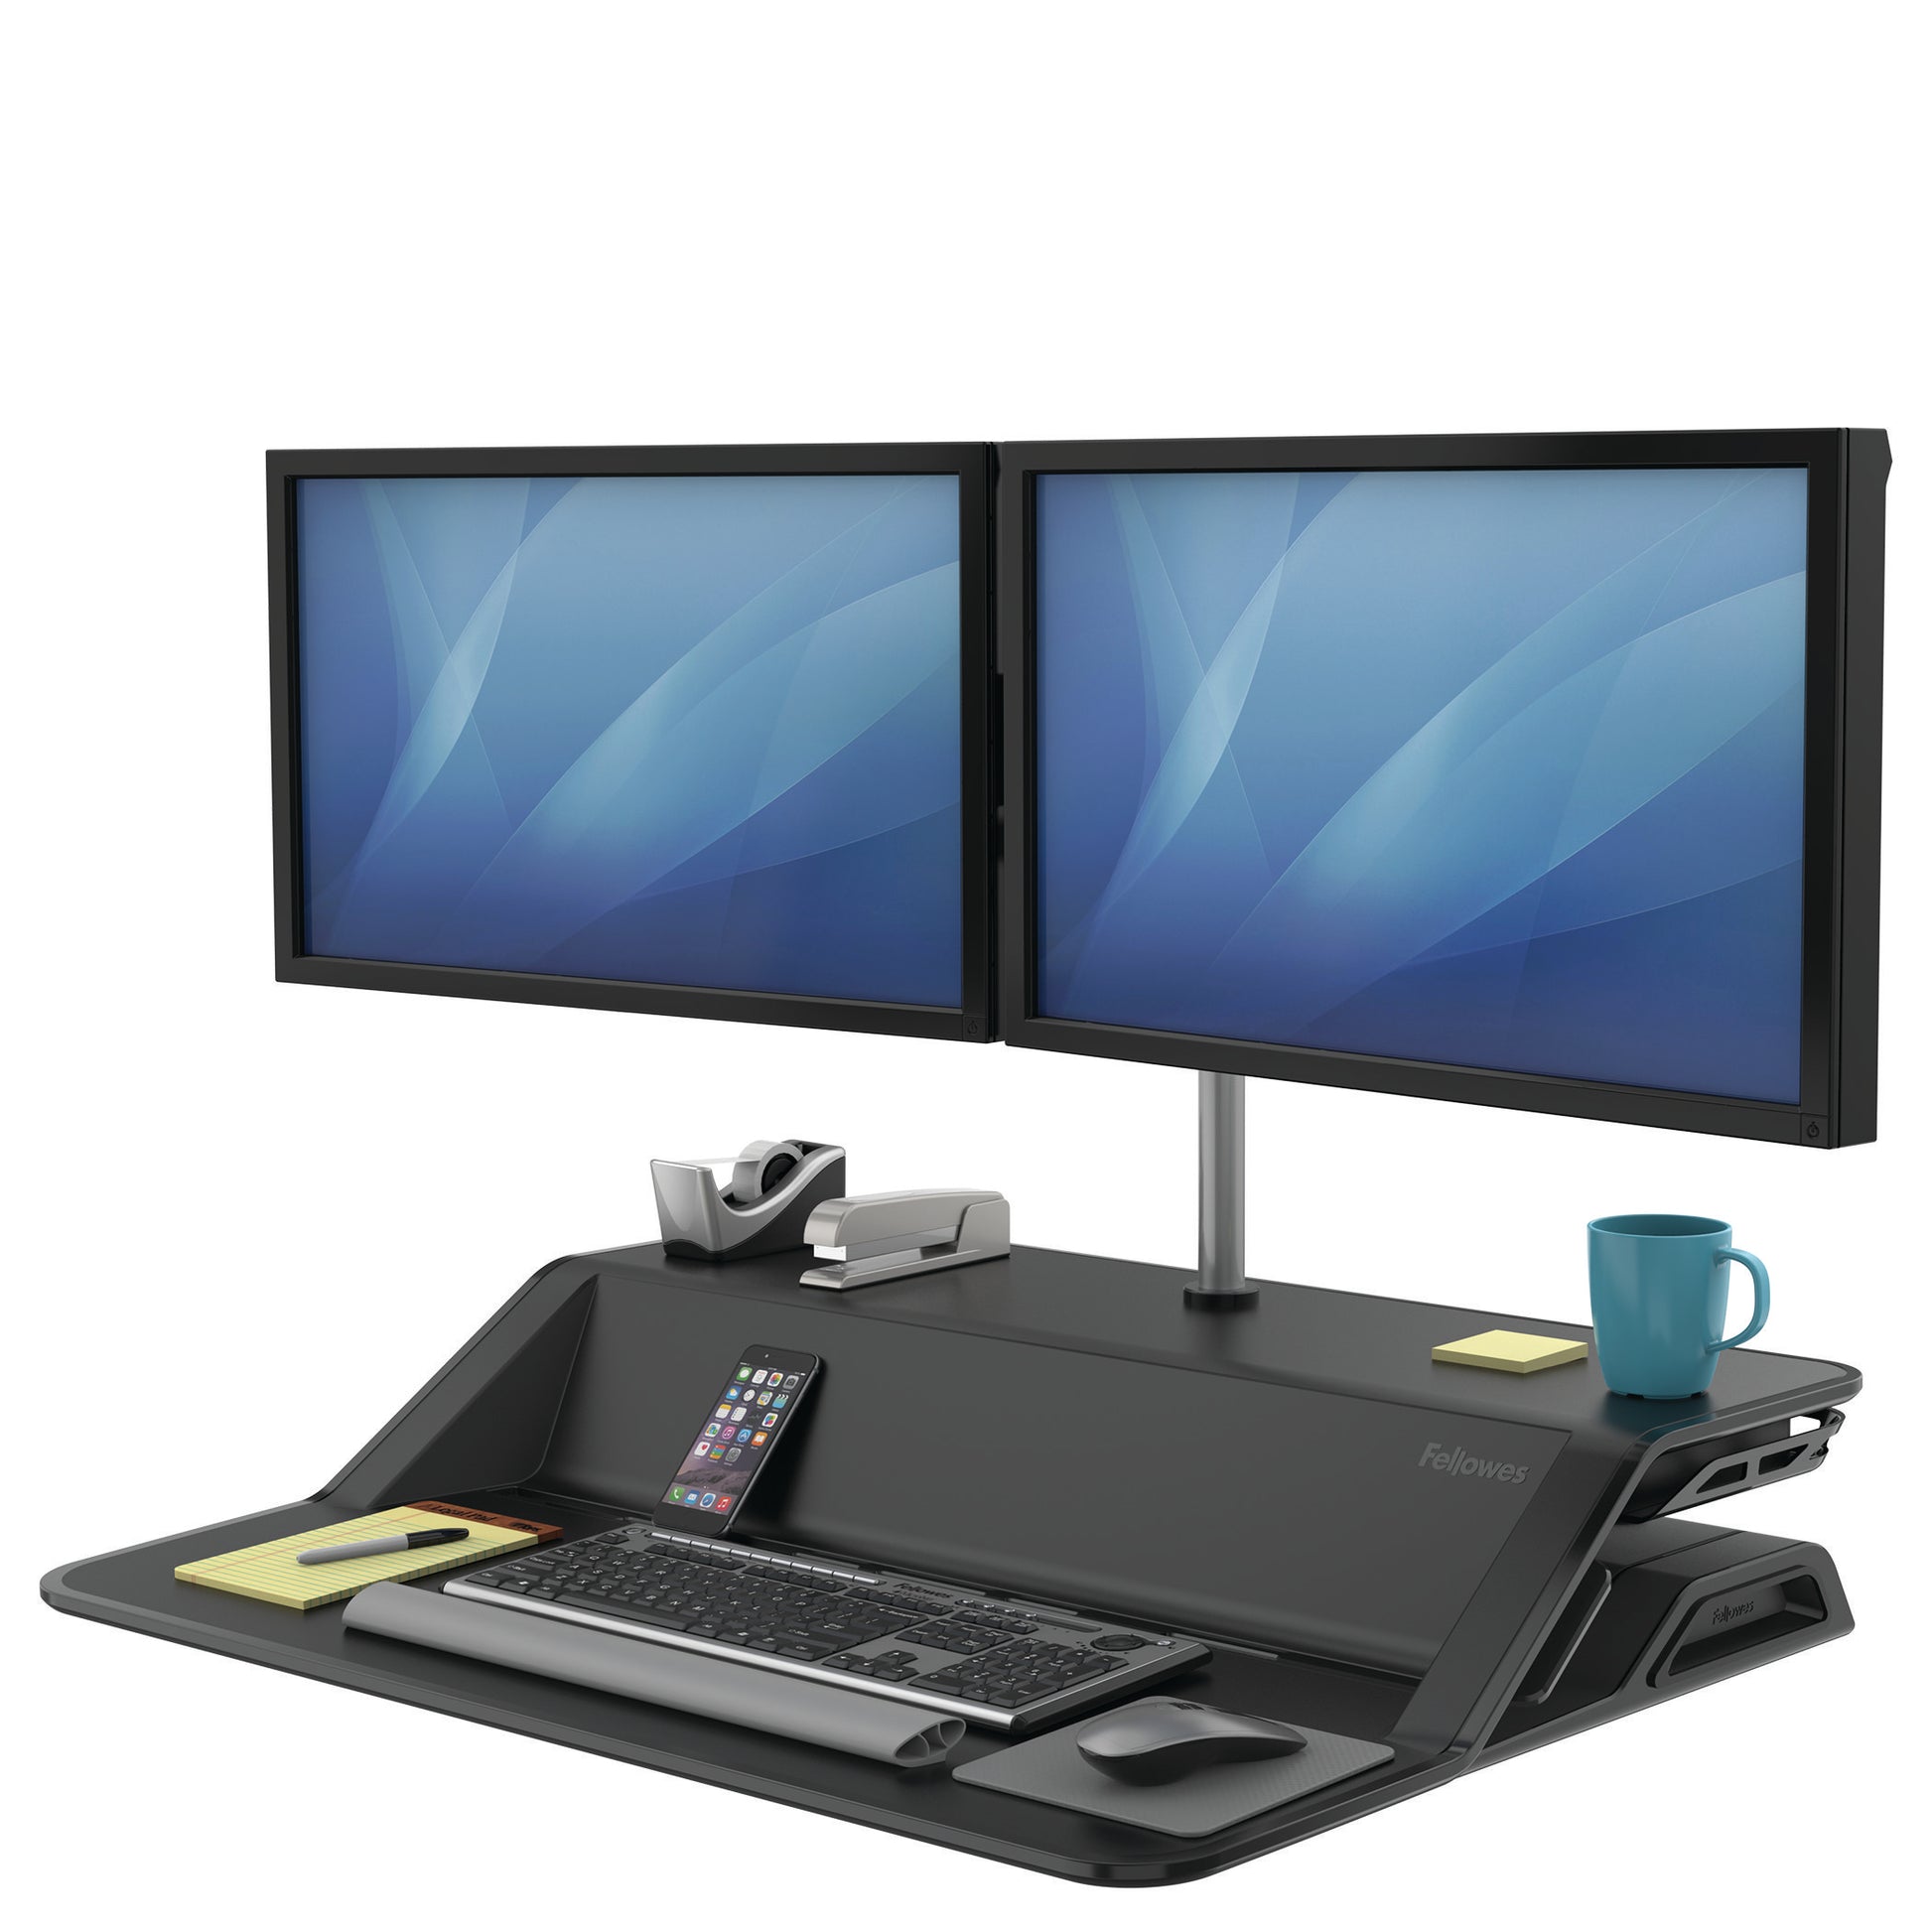 BUY FELLOWES LOTUS Sit Stand Workstation with FREE SHIPPING 7901 black dual monitor arm